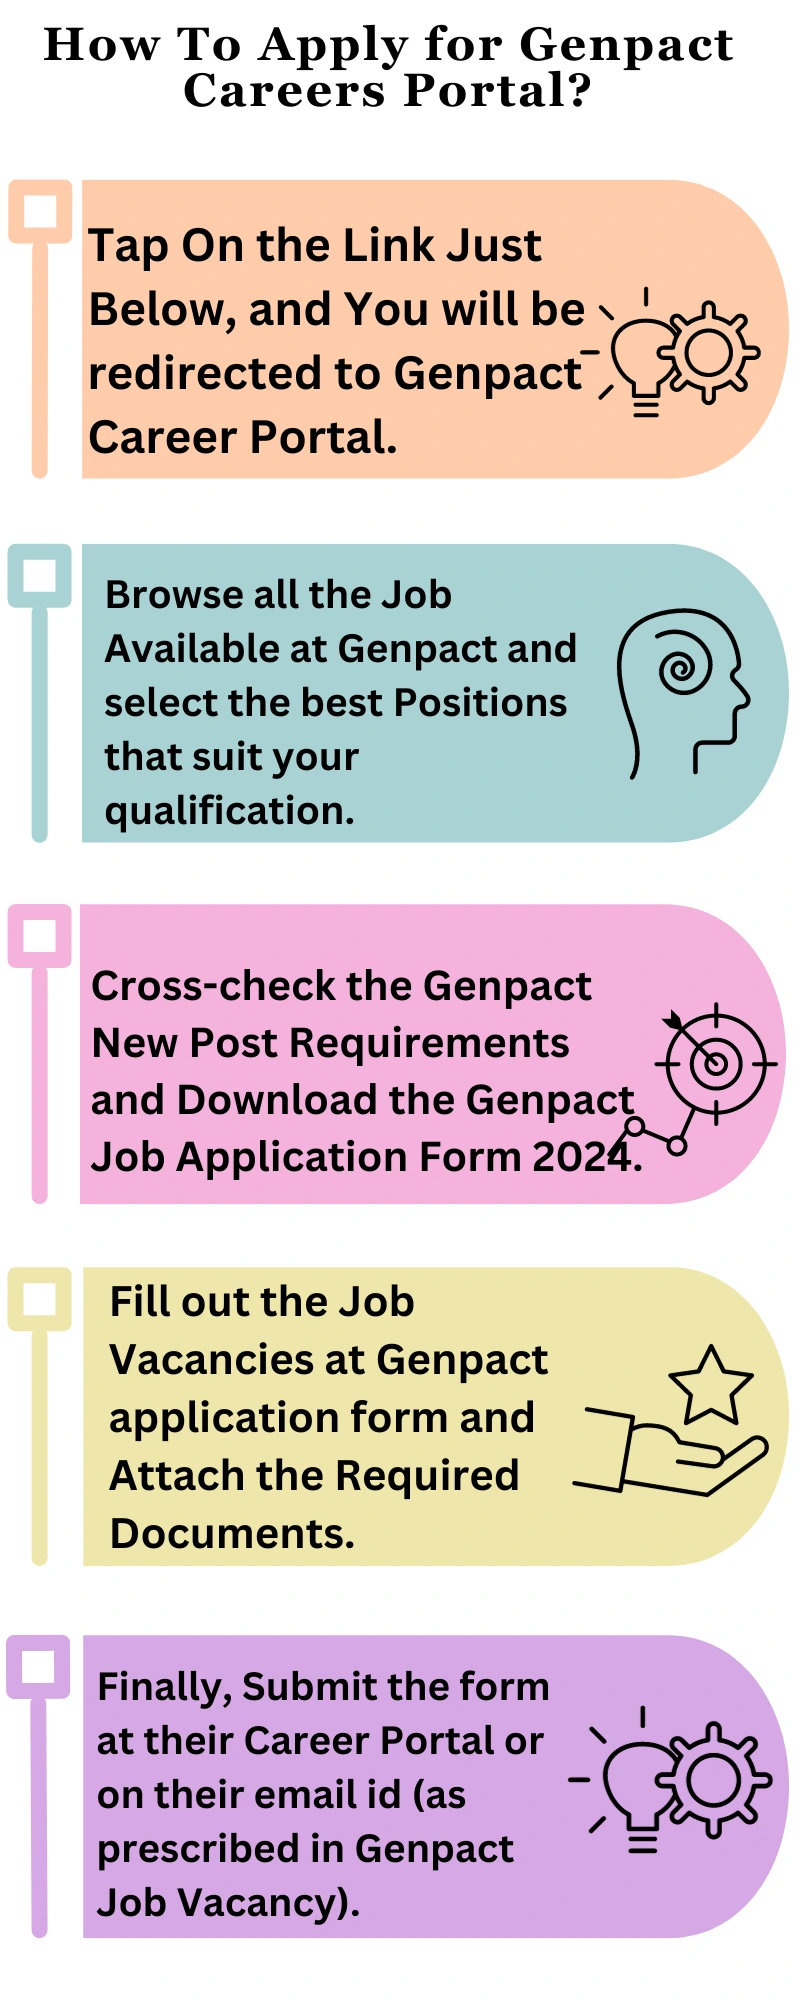 How To Apply for Genpact Careers Portal